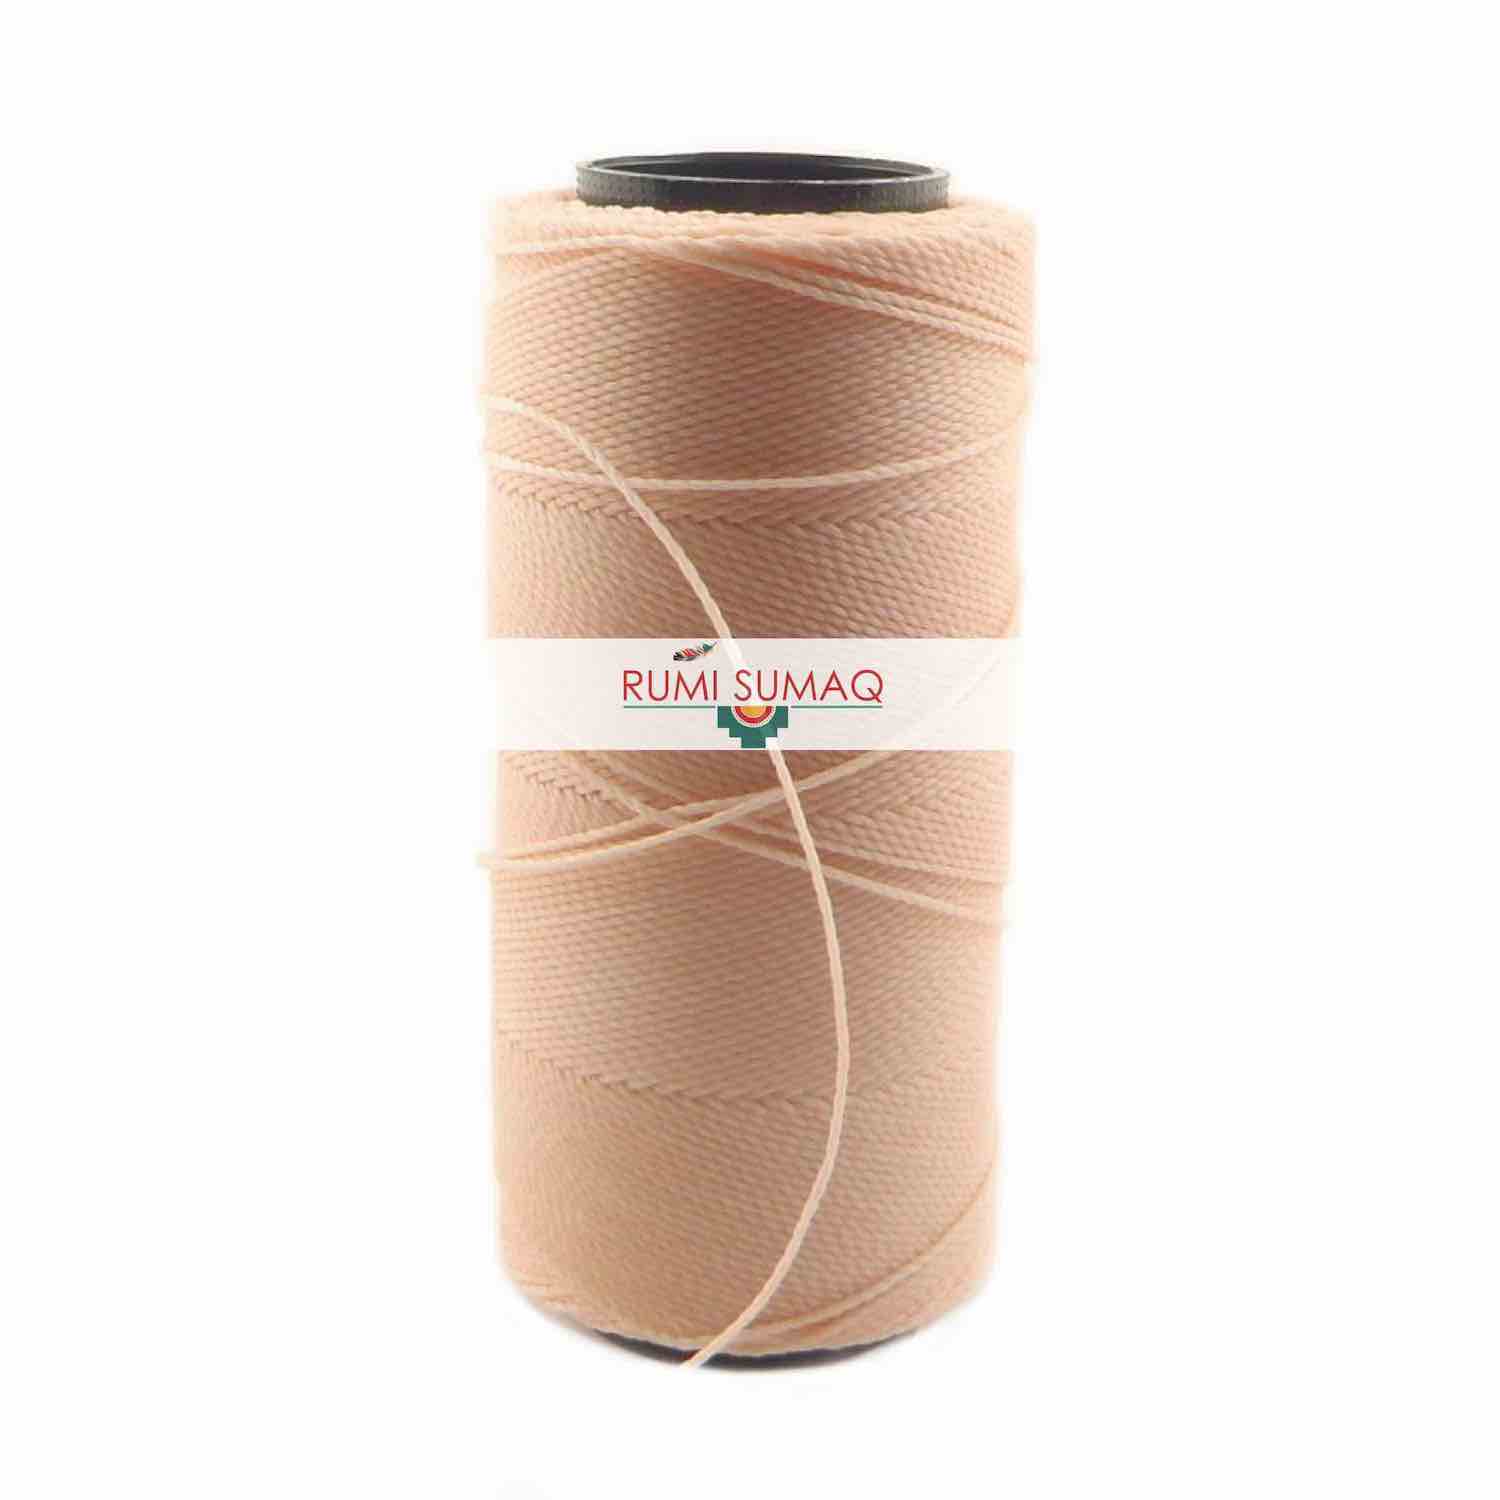 Settanyl 02-366 Blush Waxed Polyester Cord | RUMI SUMAQ Waxed Cord for Macrame, Knotting, Beading, Basket Weaving, Leather Working, Hand Stitching, Quilting and Jewelry Making